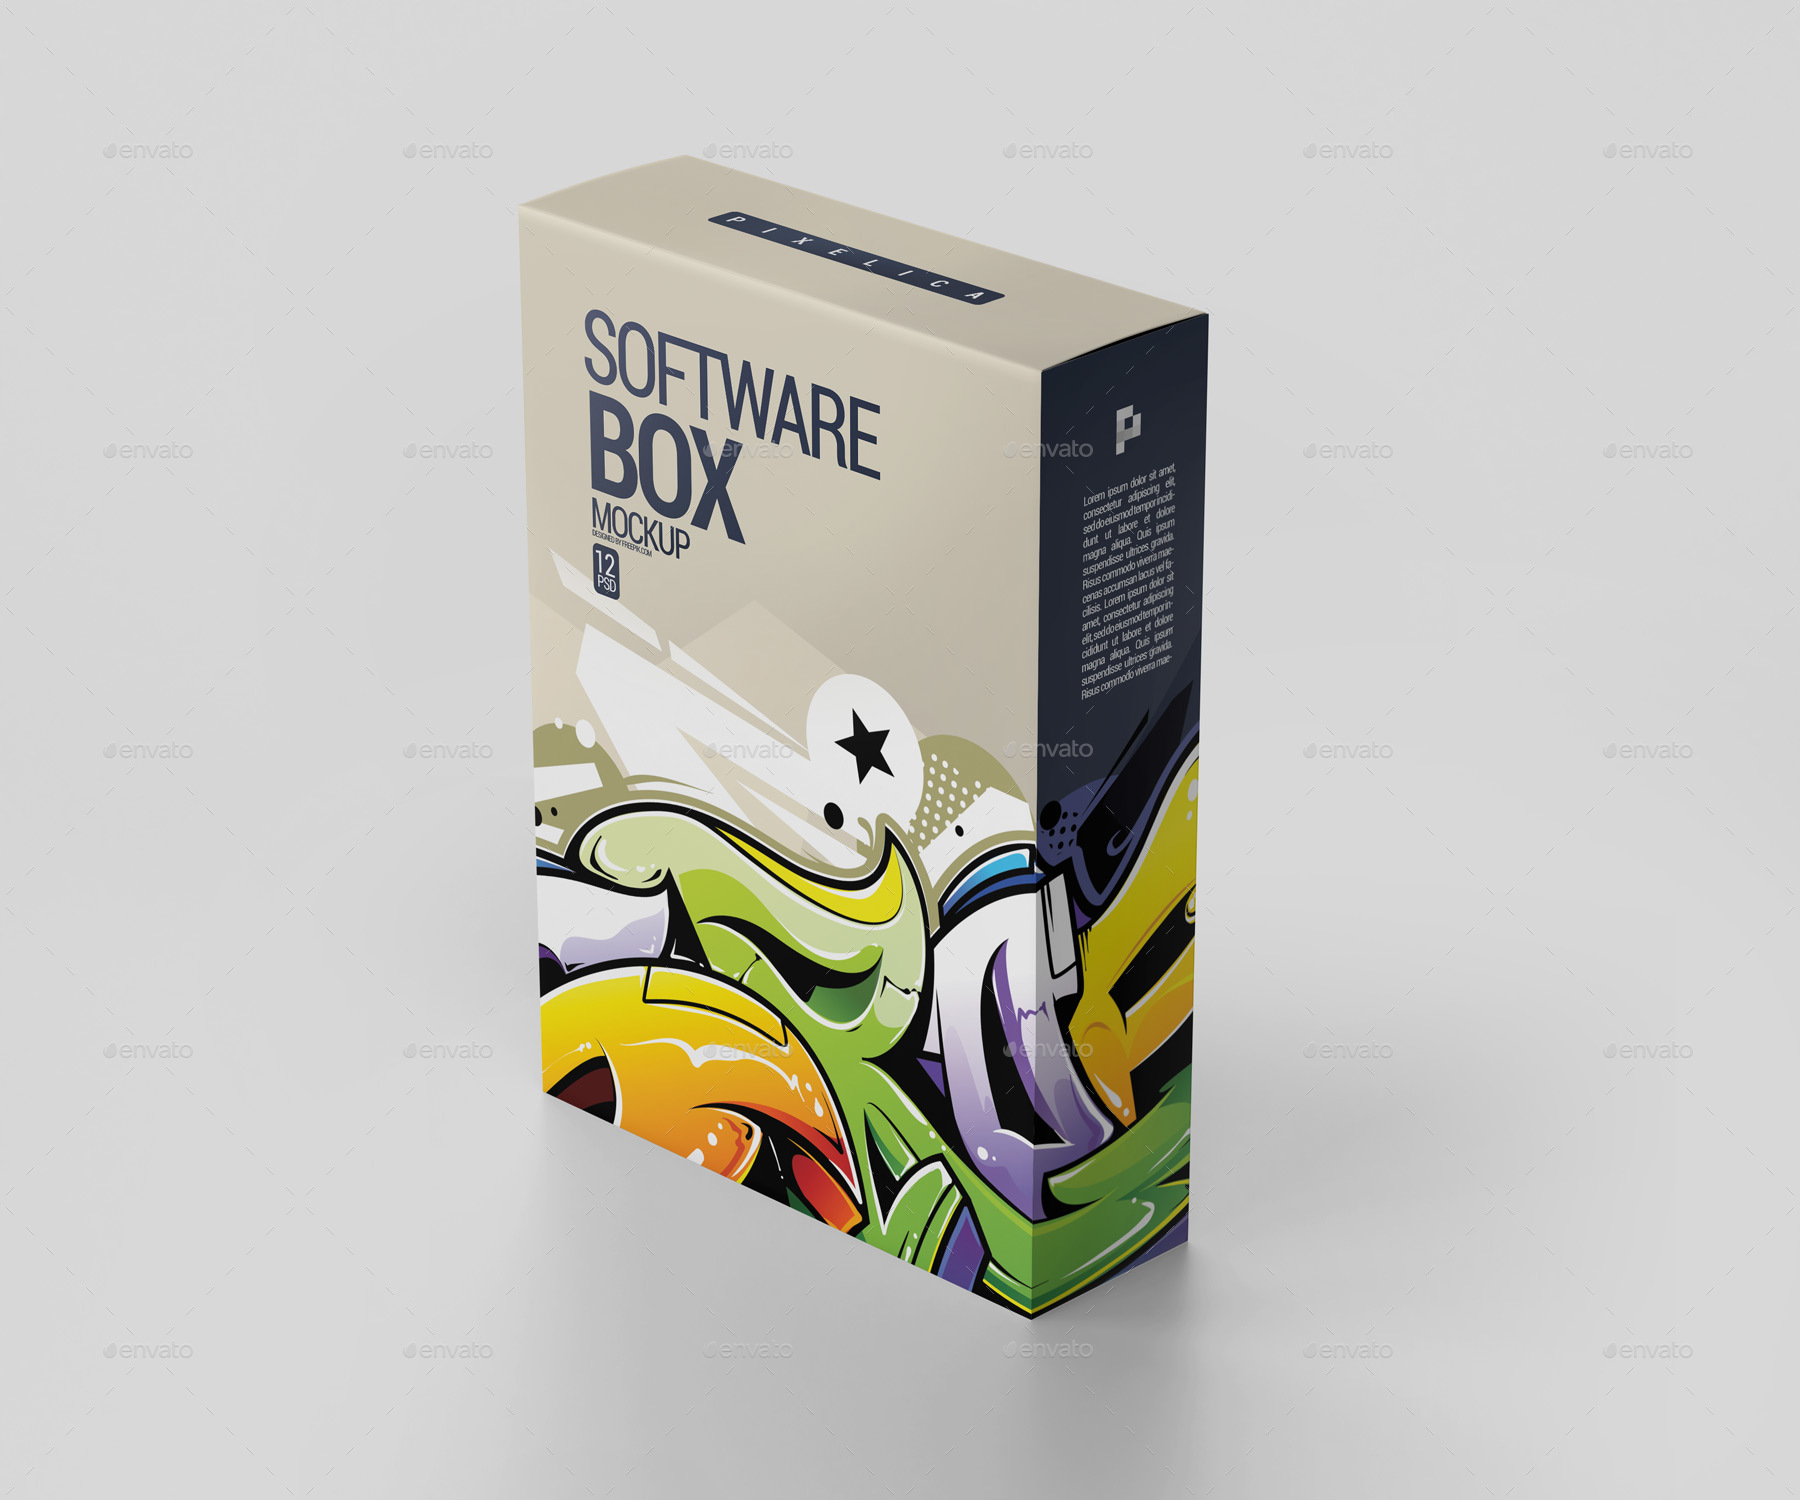 Download Software Box Mockup by Pixelica21 | GraphicRiver